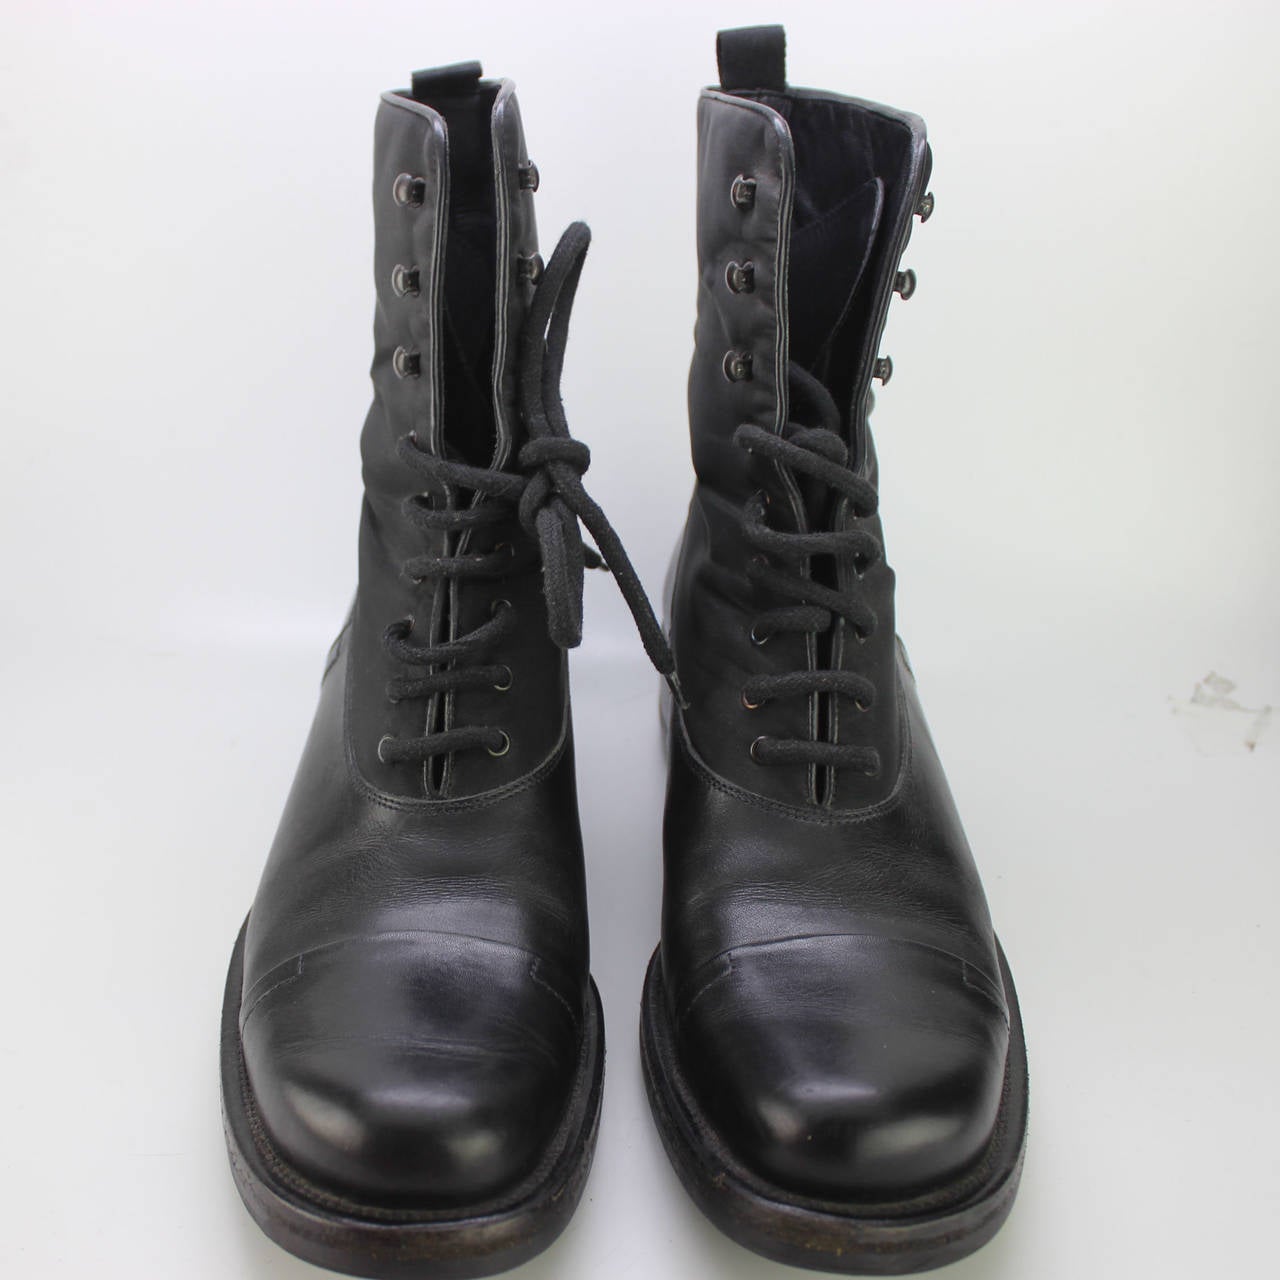 SALE! Originally $295
These are classic Prada sporty lace-up boots with a combination of leather and nylon.  The shoe is made of sturdy leather with a treaded sole, and laces up the front.